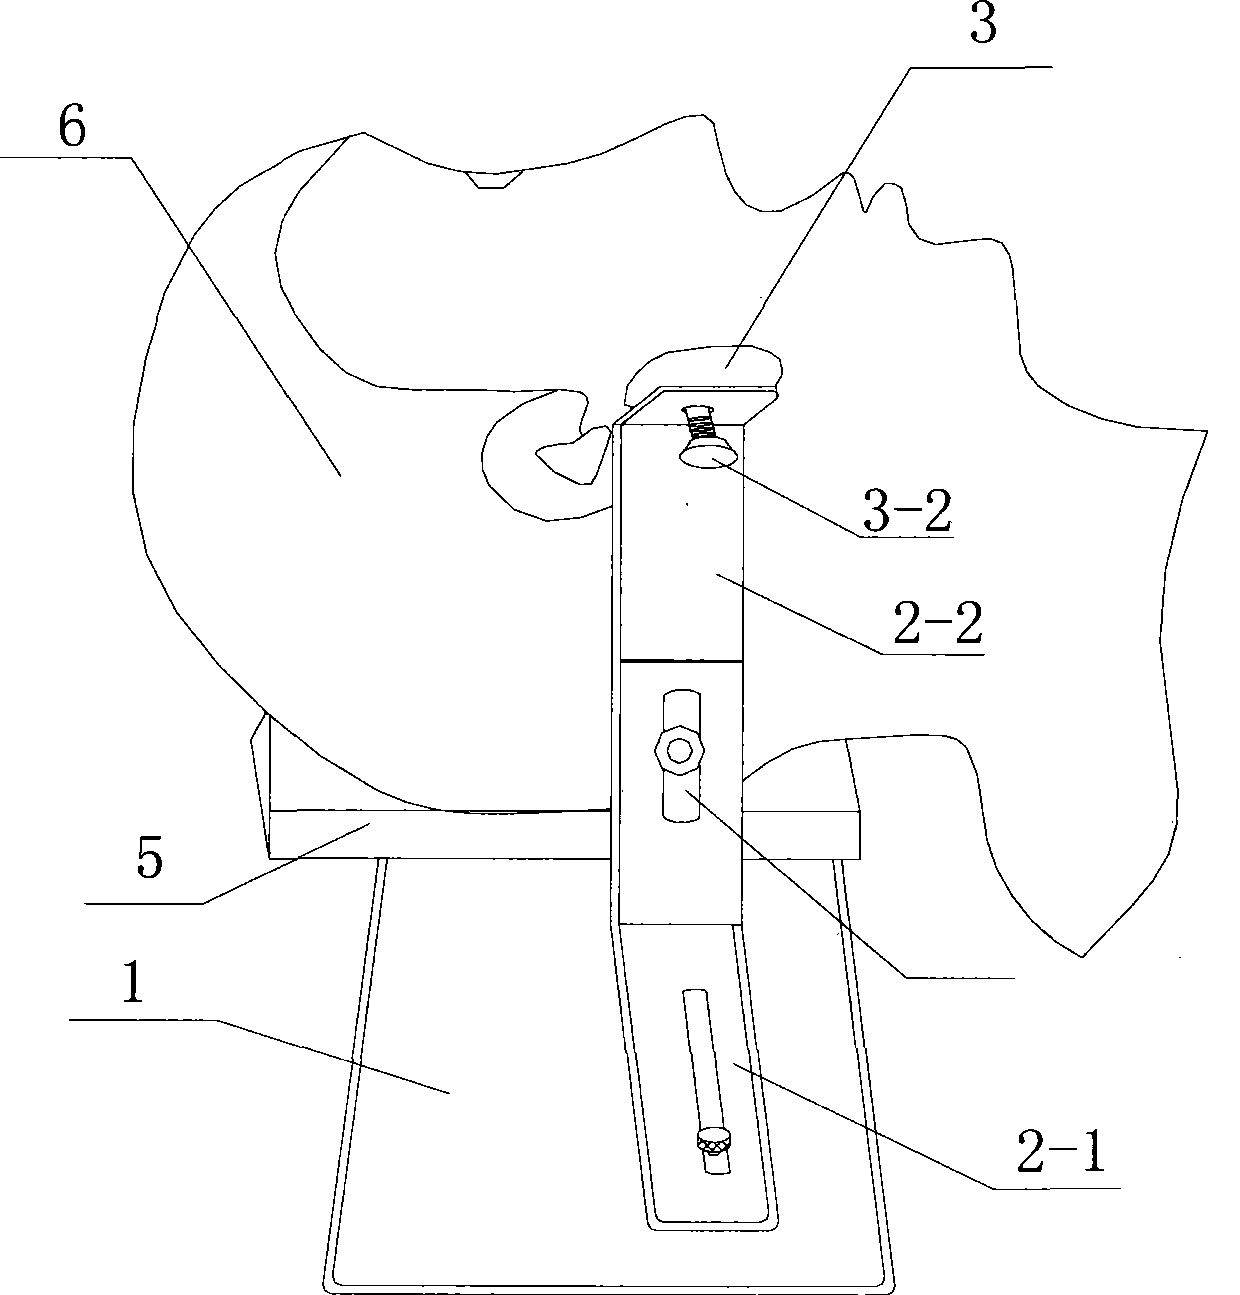 Lower jaw supporting device